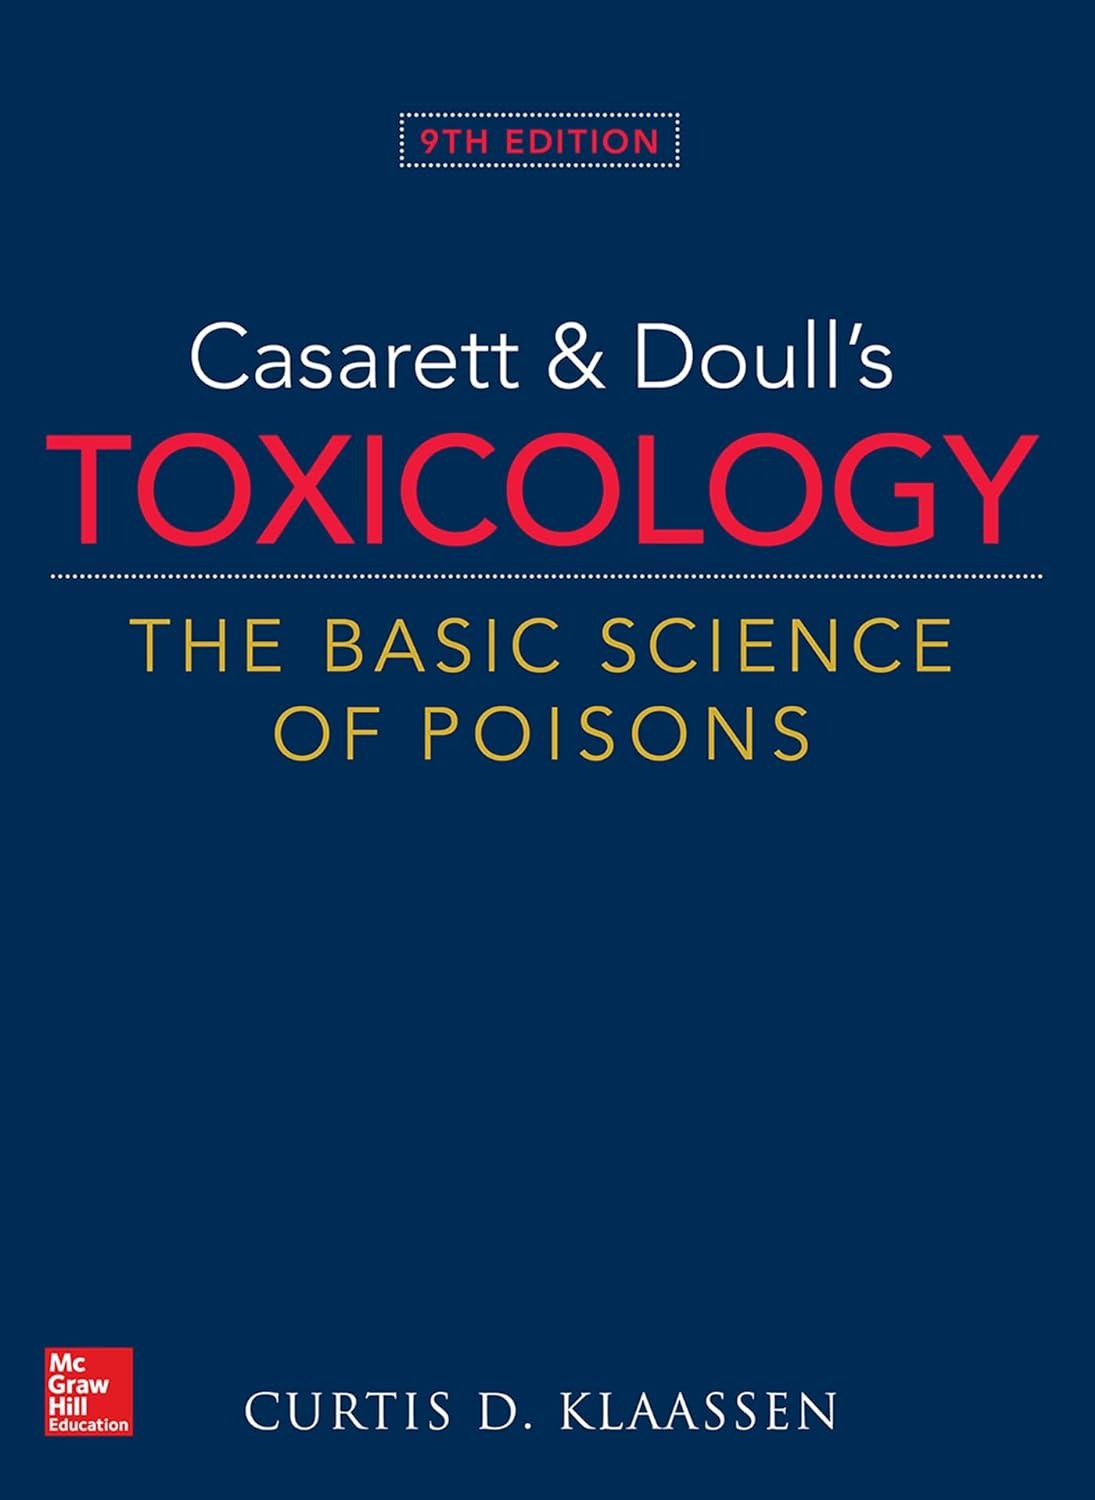 casarett and doulls toxicology the basic science of poisons 9th edition curtis d. klaassen 1259863743,